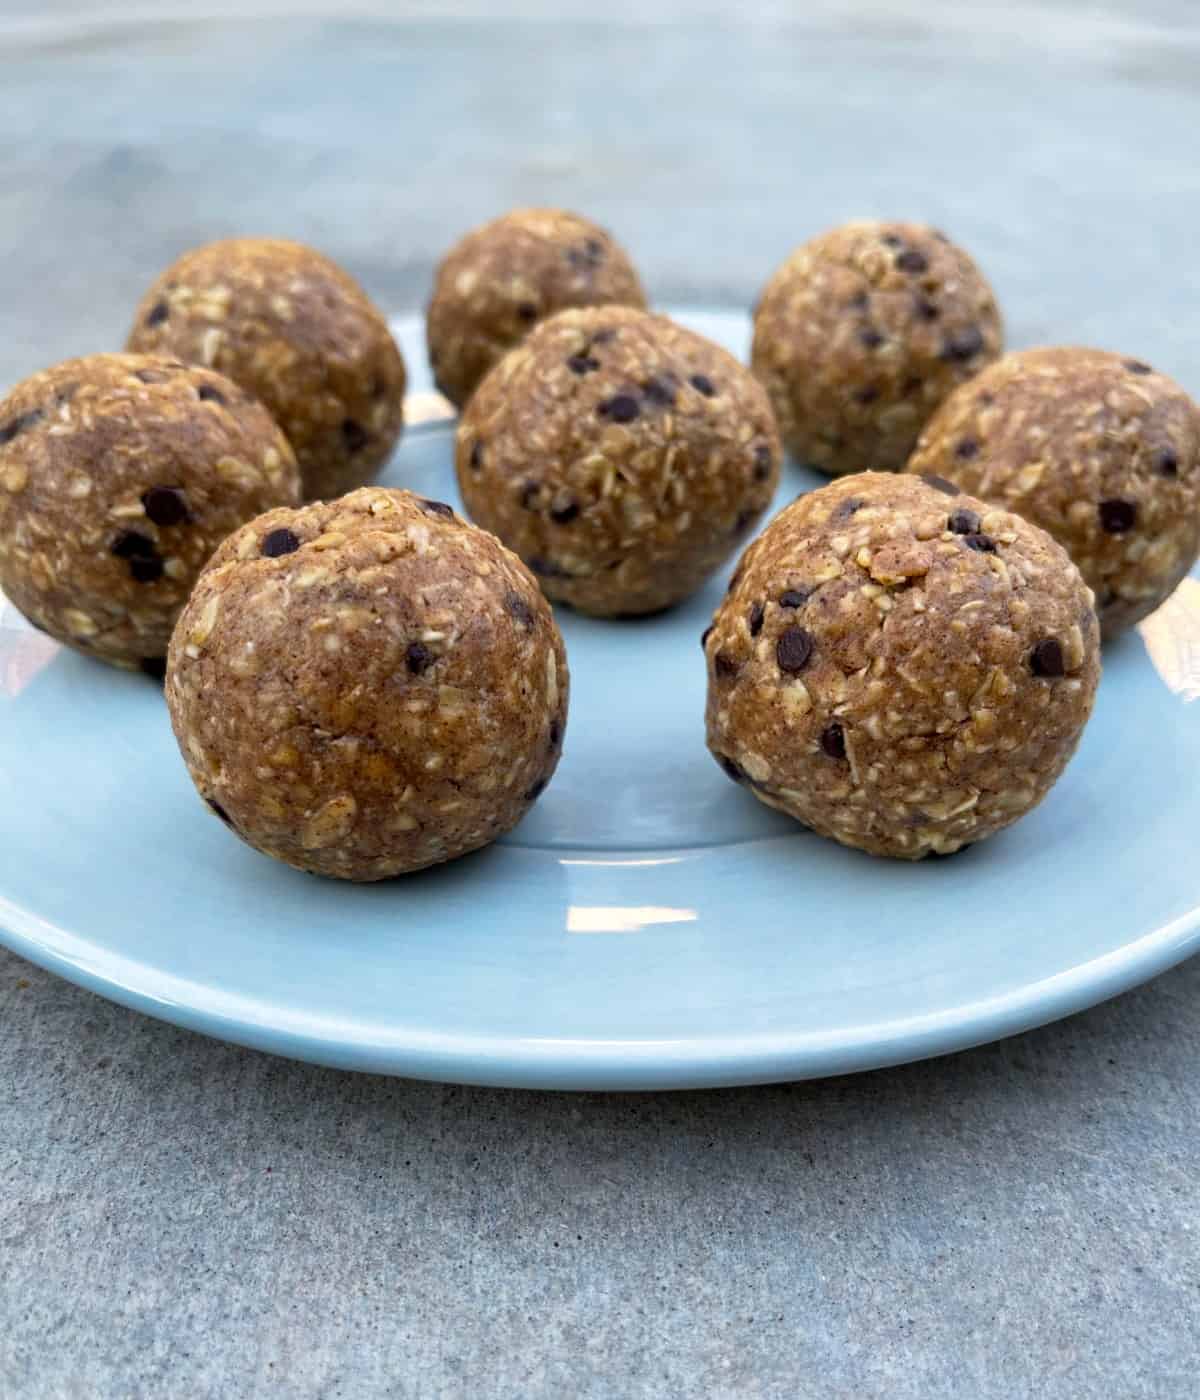 Easy no-bake oatmeal chocolate chip protein bites on blue plate up close.